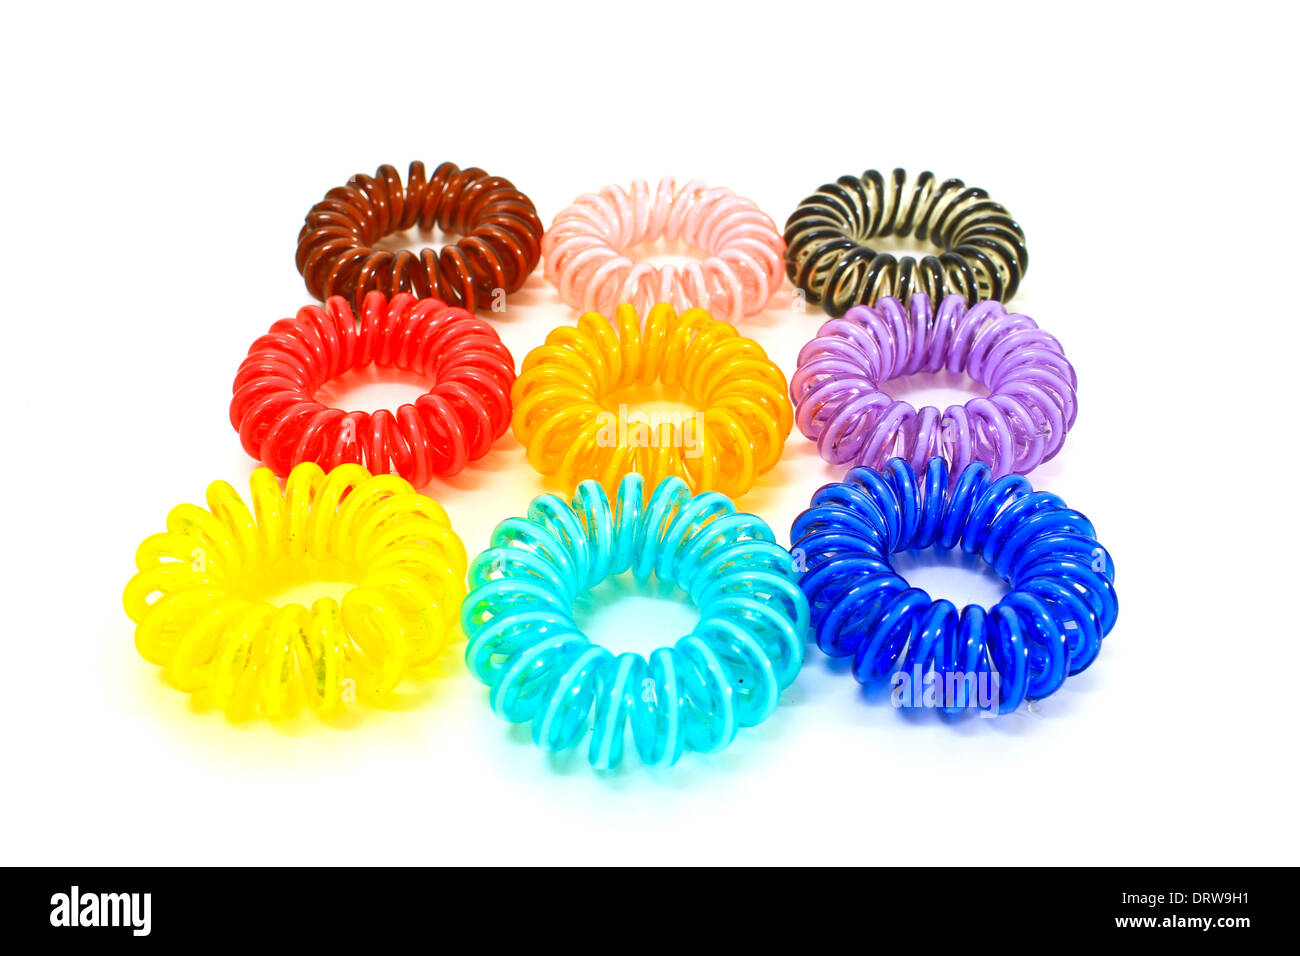 Spiral colorful elastic hair ties used on a white background. Stock Photo